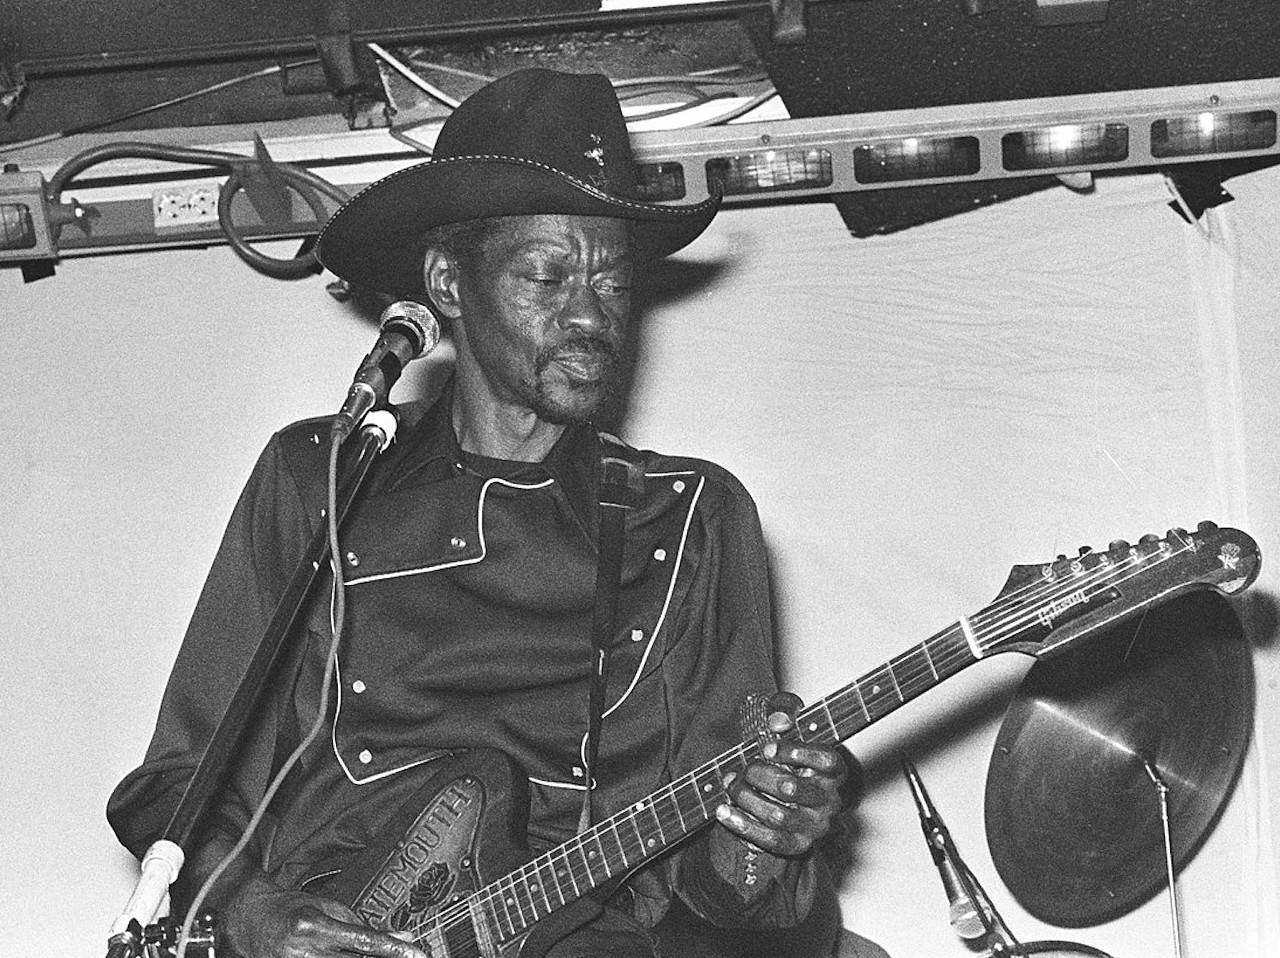 Clarence "Gatemouth" Brown
Legendary blues guitar slinger Clarence “Gatemouth” Brown started his musical career after the end of World War II playing drums in San Antonio. His musical travels eventually took him to Tennessee, Louisiana and on numerous European tours.